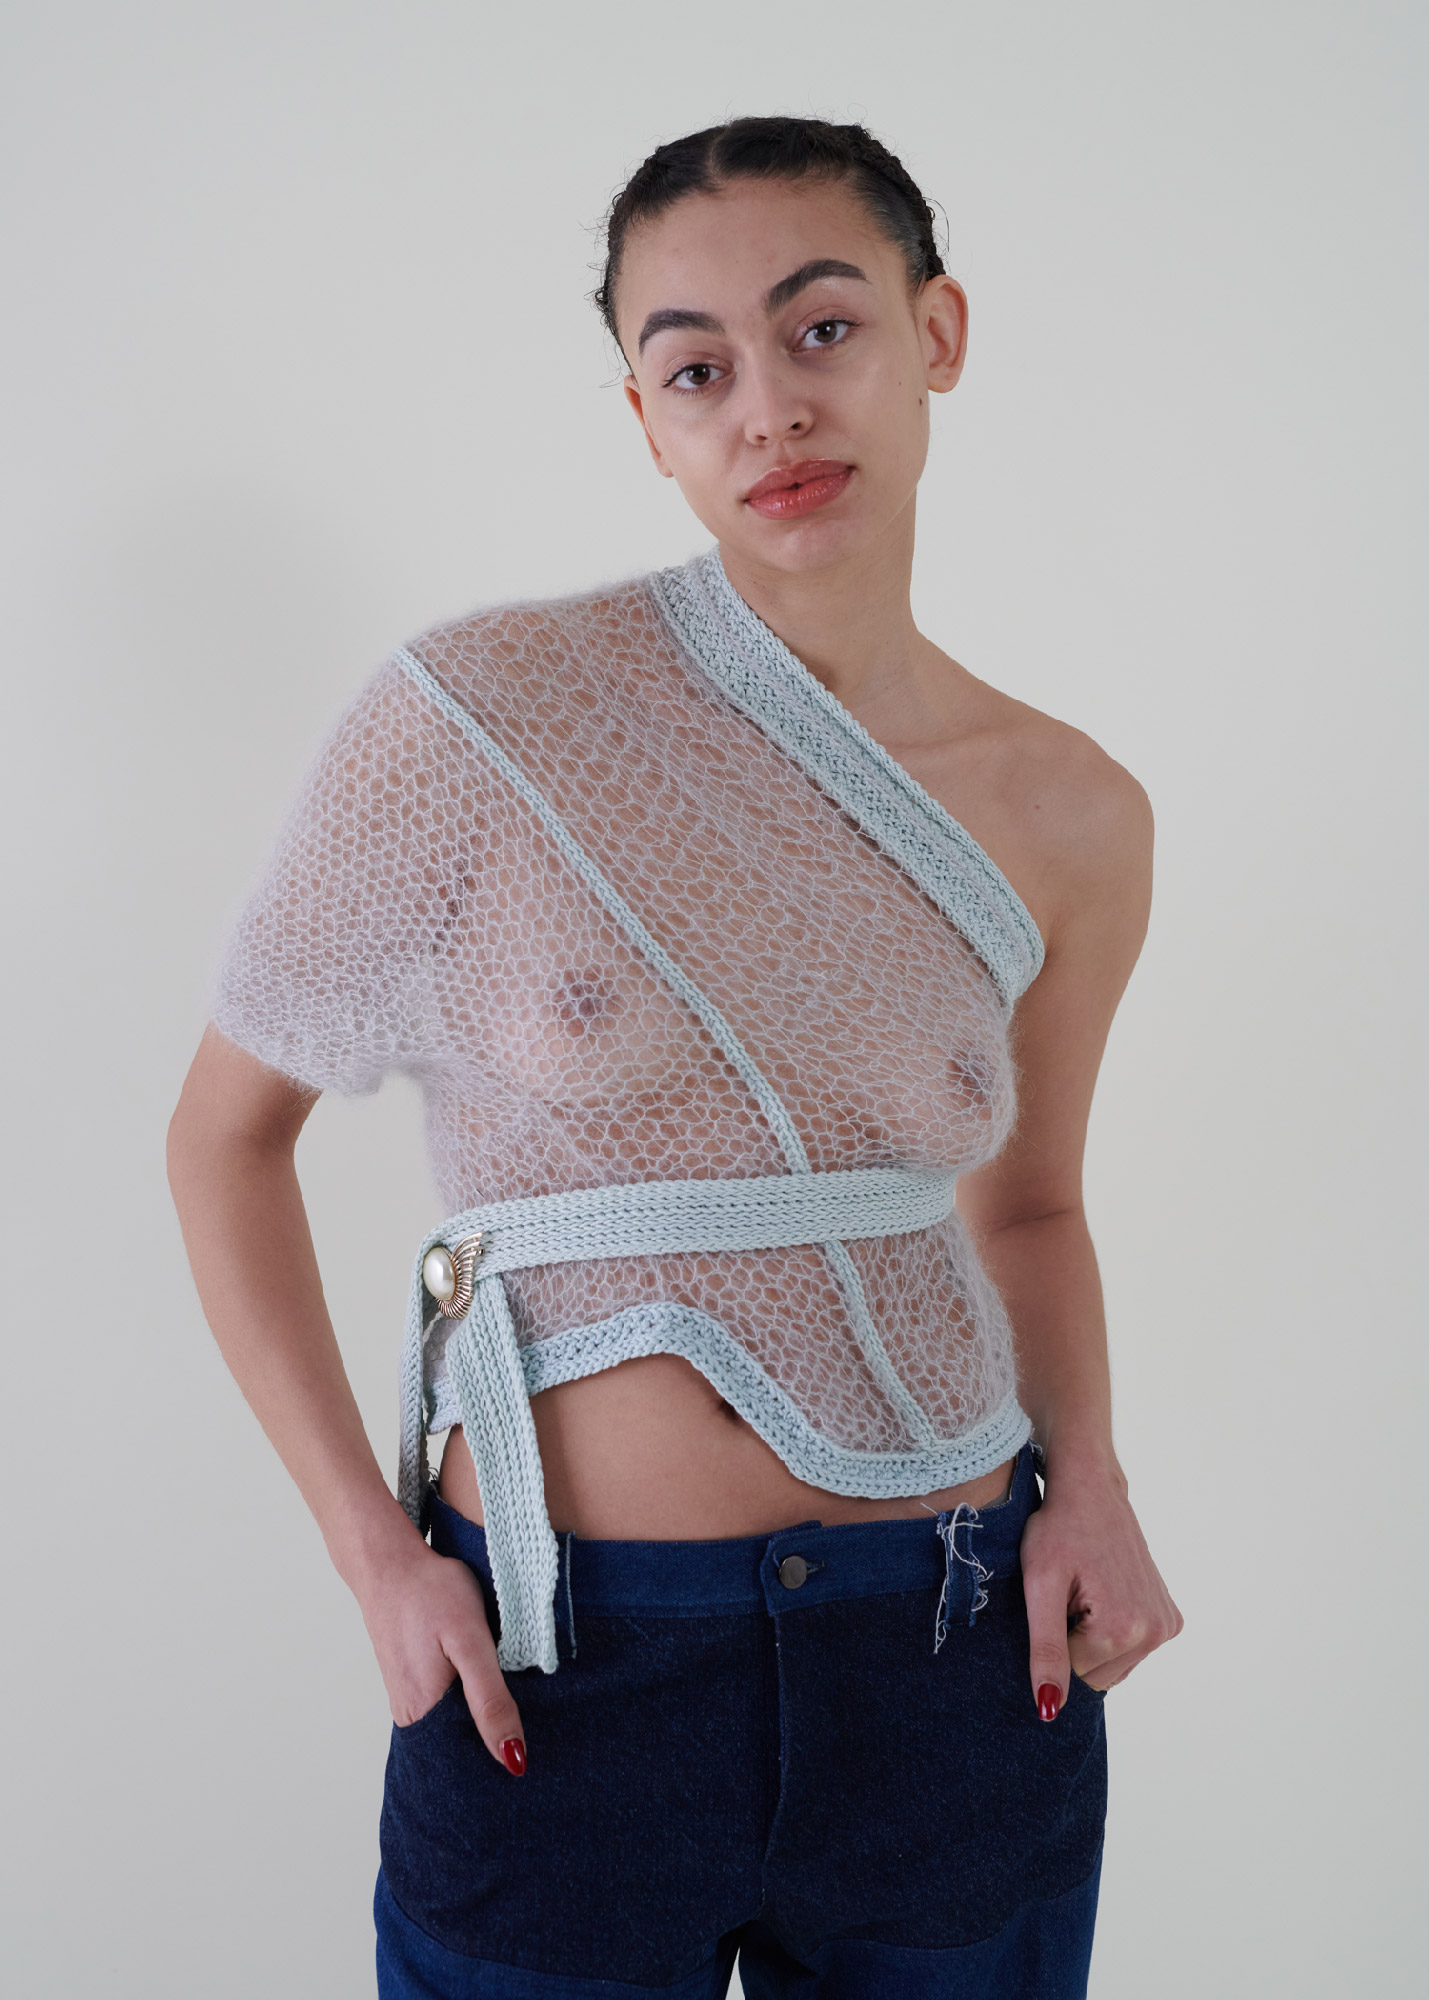 Sustainable fashion with upcycled angora crochet top from Aldwin Teva William